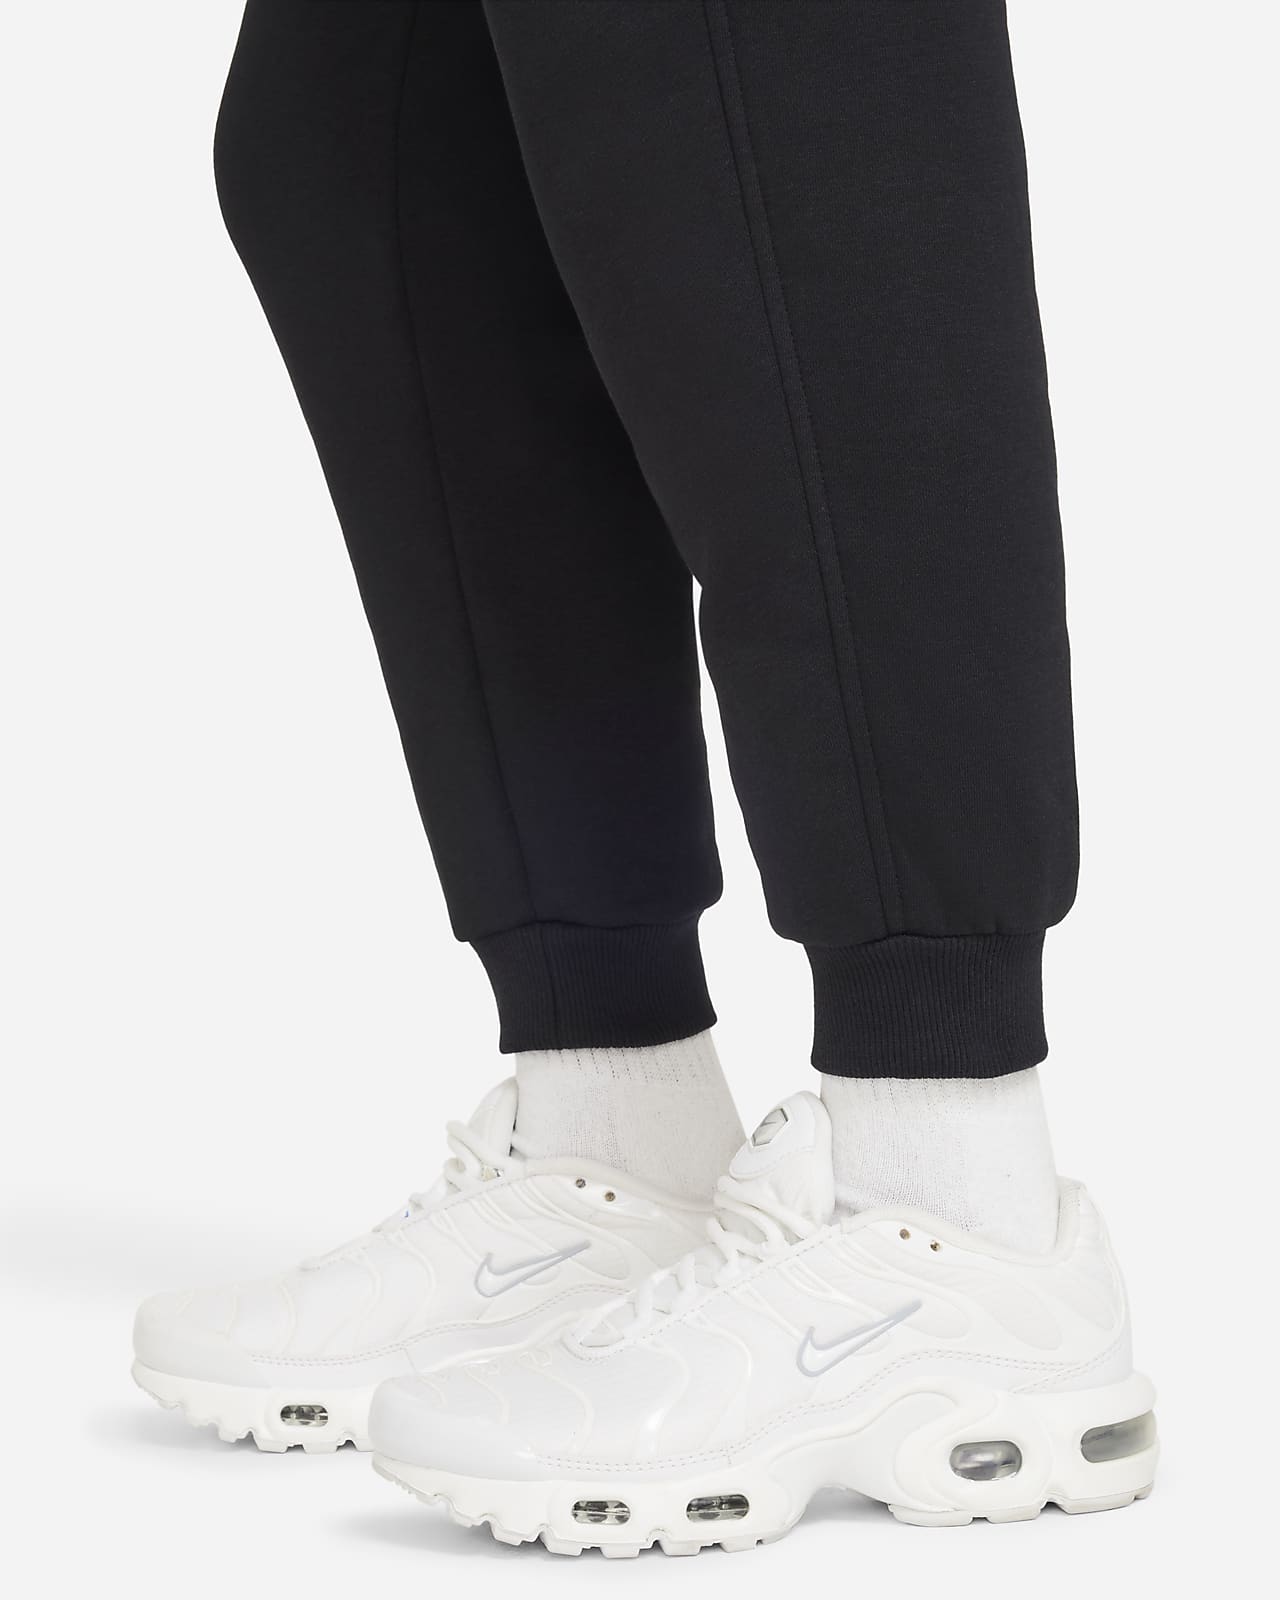 NIKE Athletic Pants, Size: Large (12- 14) – Military Steals and